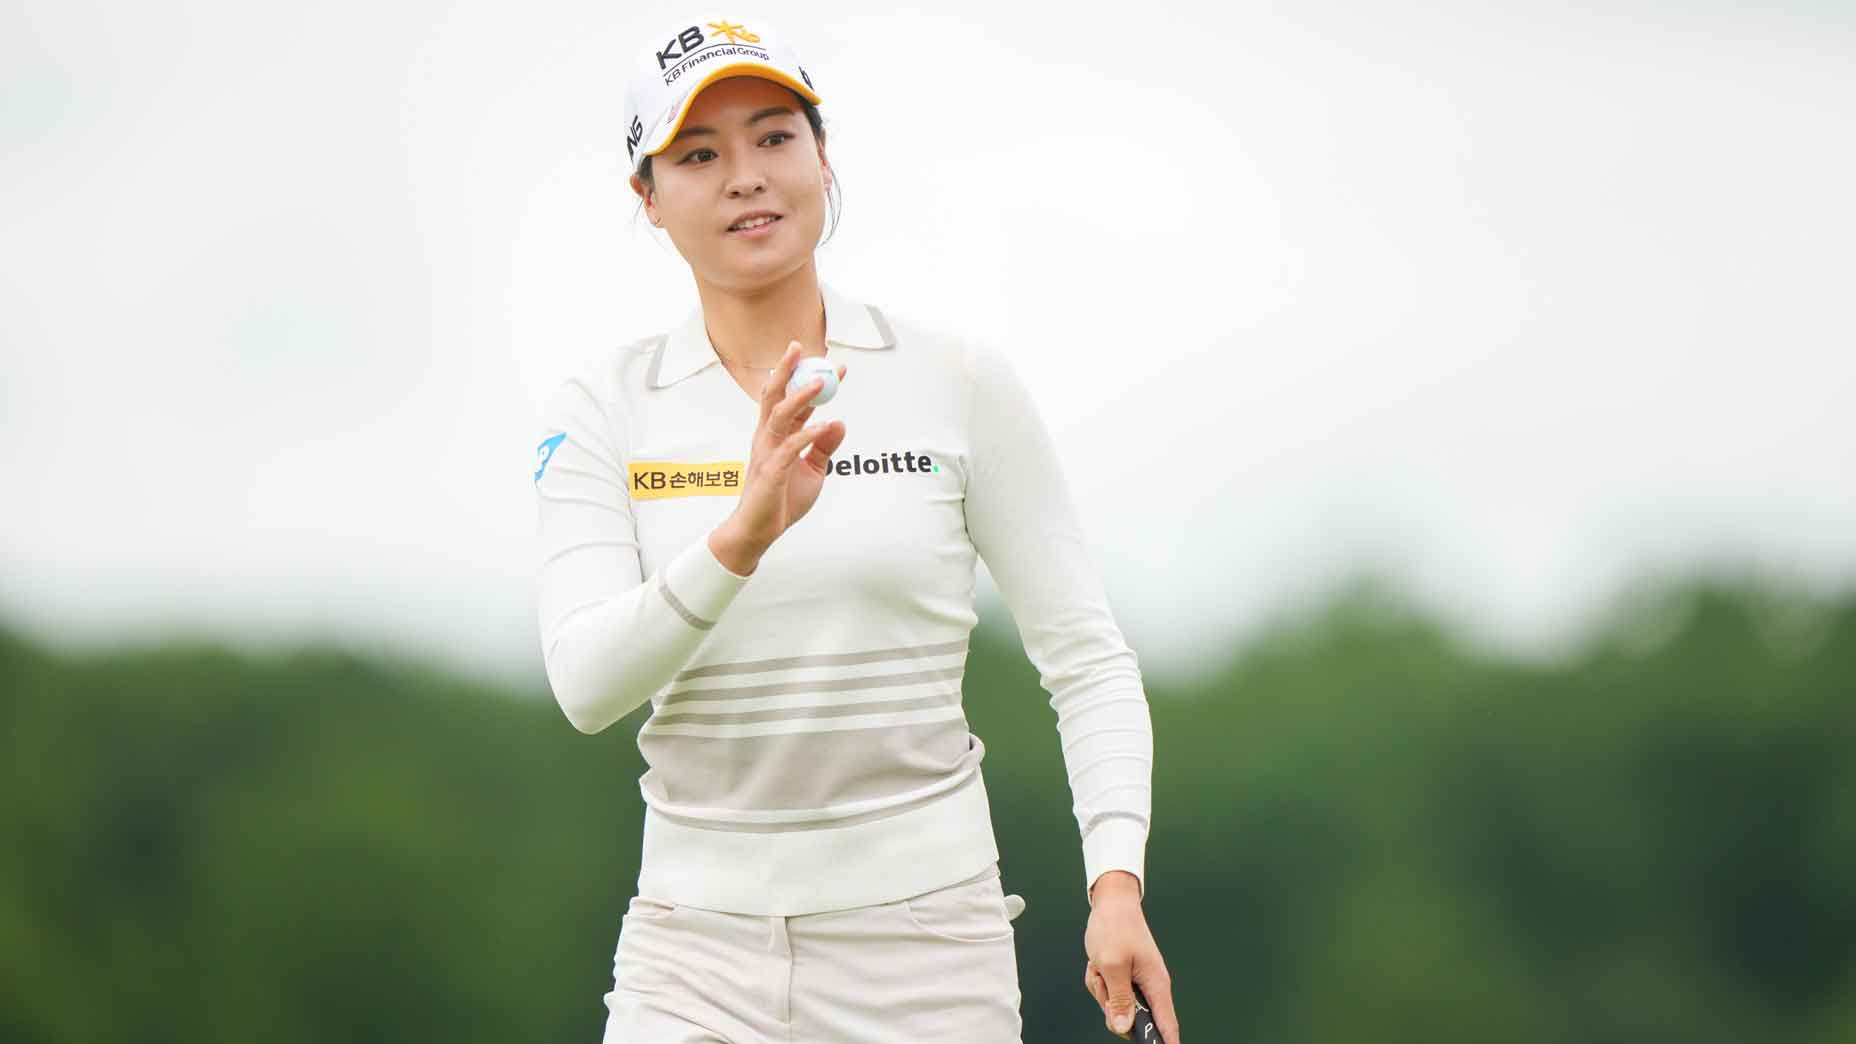 She set the course record at a major. But that alone doesn’t capture utter dominance